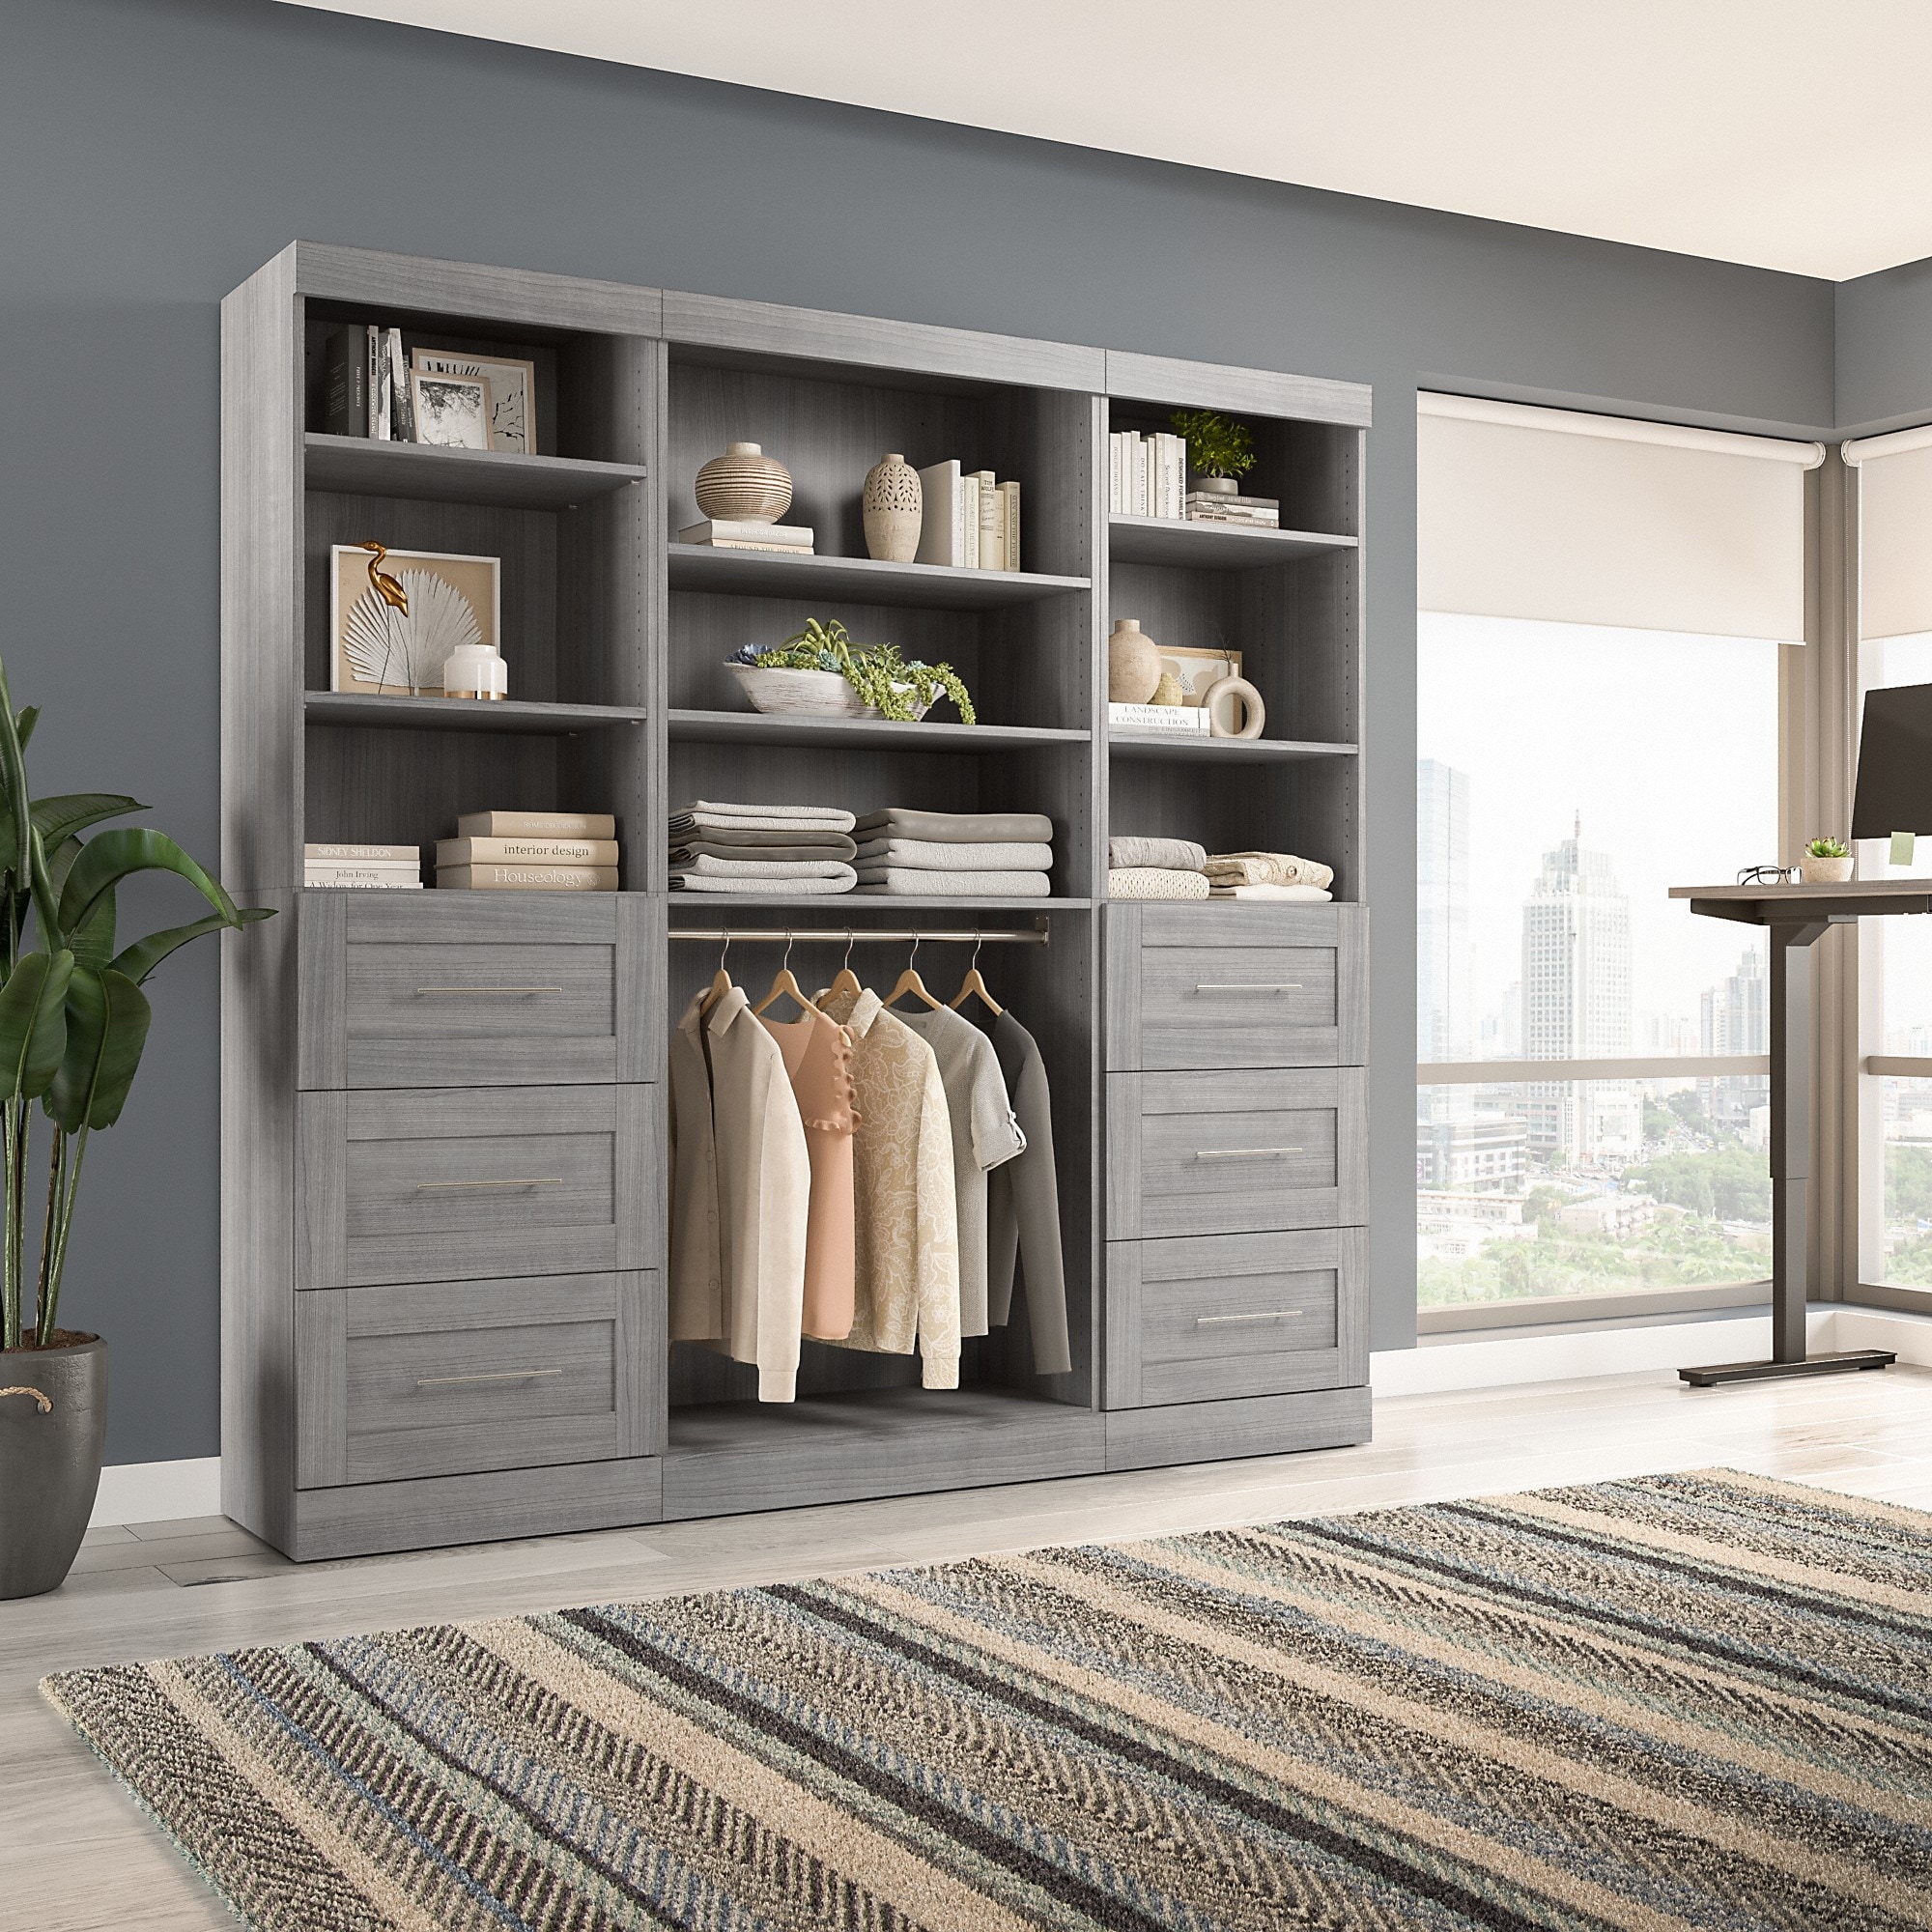 https://ak1.ostkcdn.com/images/products/is/images/direct/a6e7226ccf16e6525de7d31befdc7d7b46b563fe/Pur-86W-Closet-Organization-System-with-Drawers-by-Bestar.jpg